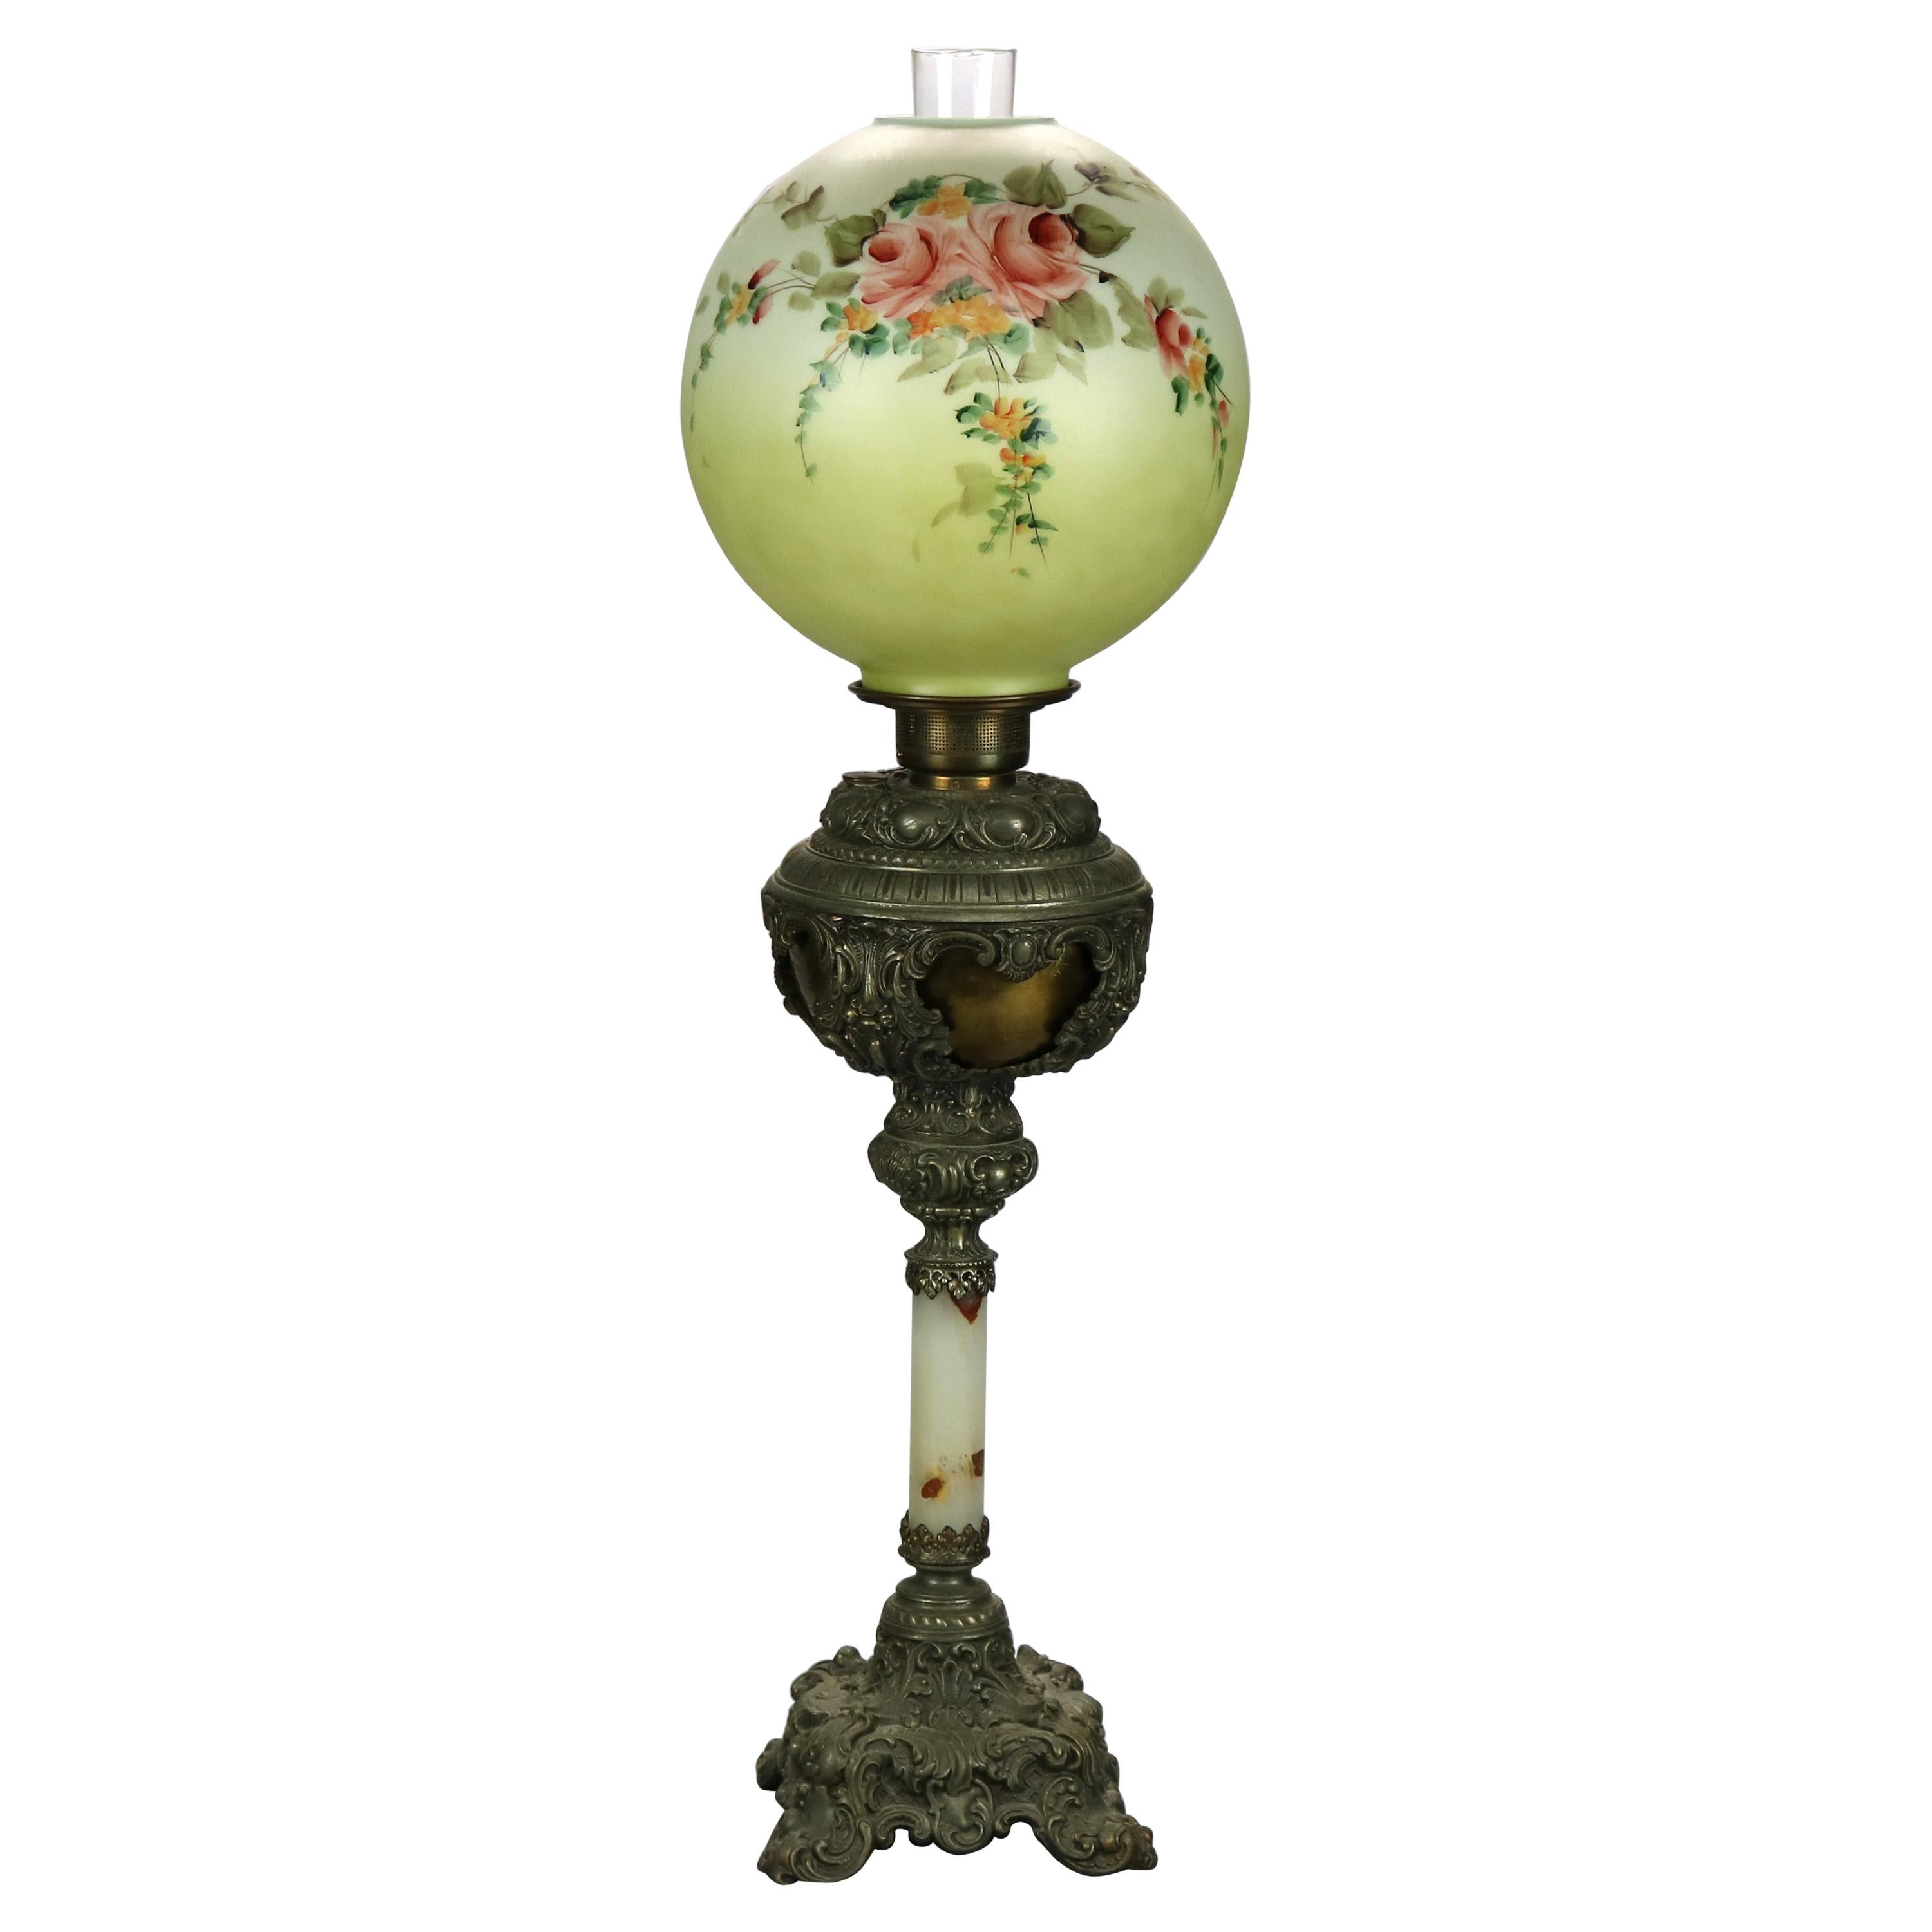 Antique Victorian Onyx & Gilt Metal Parlor Lamp with Hand Painted Globe, c1890